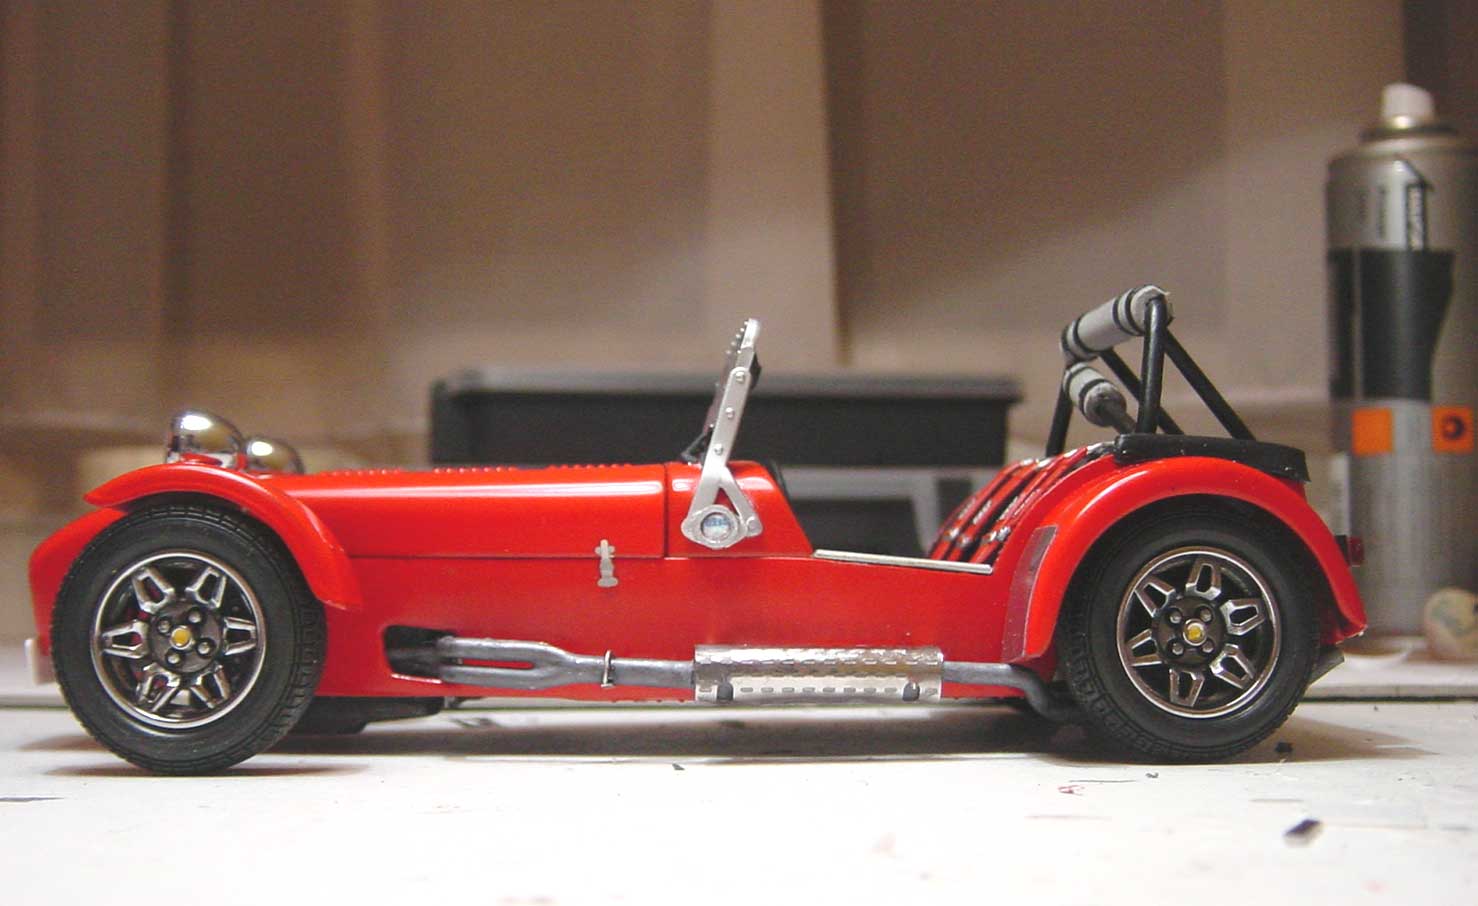 The modified model car thread - pics - Page 7 - Scale Models - PistonHeads